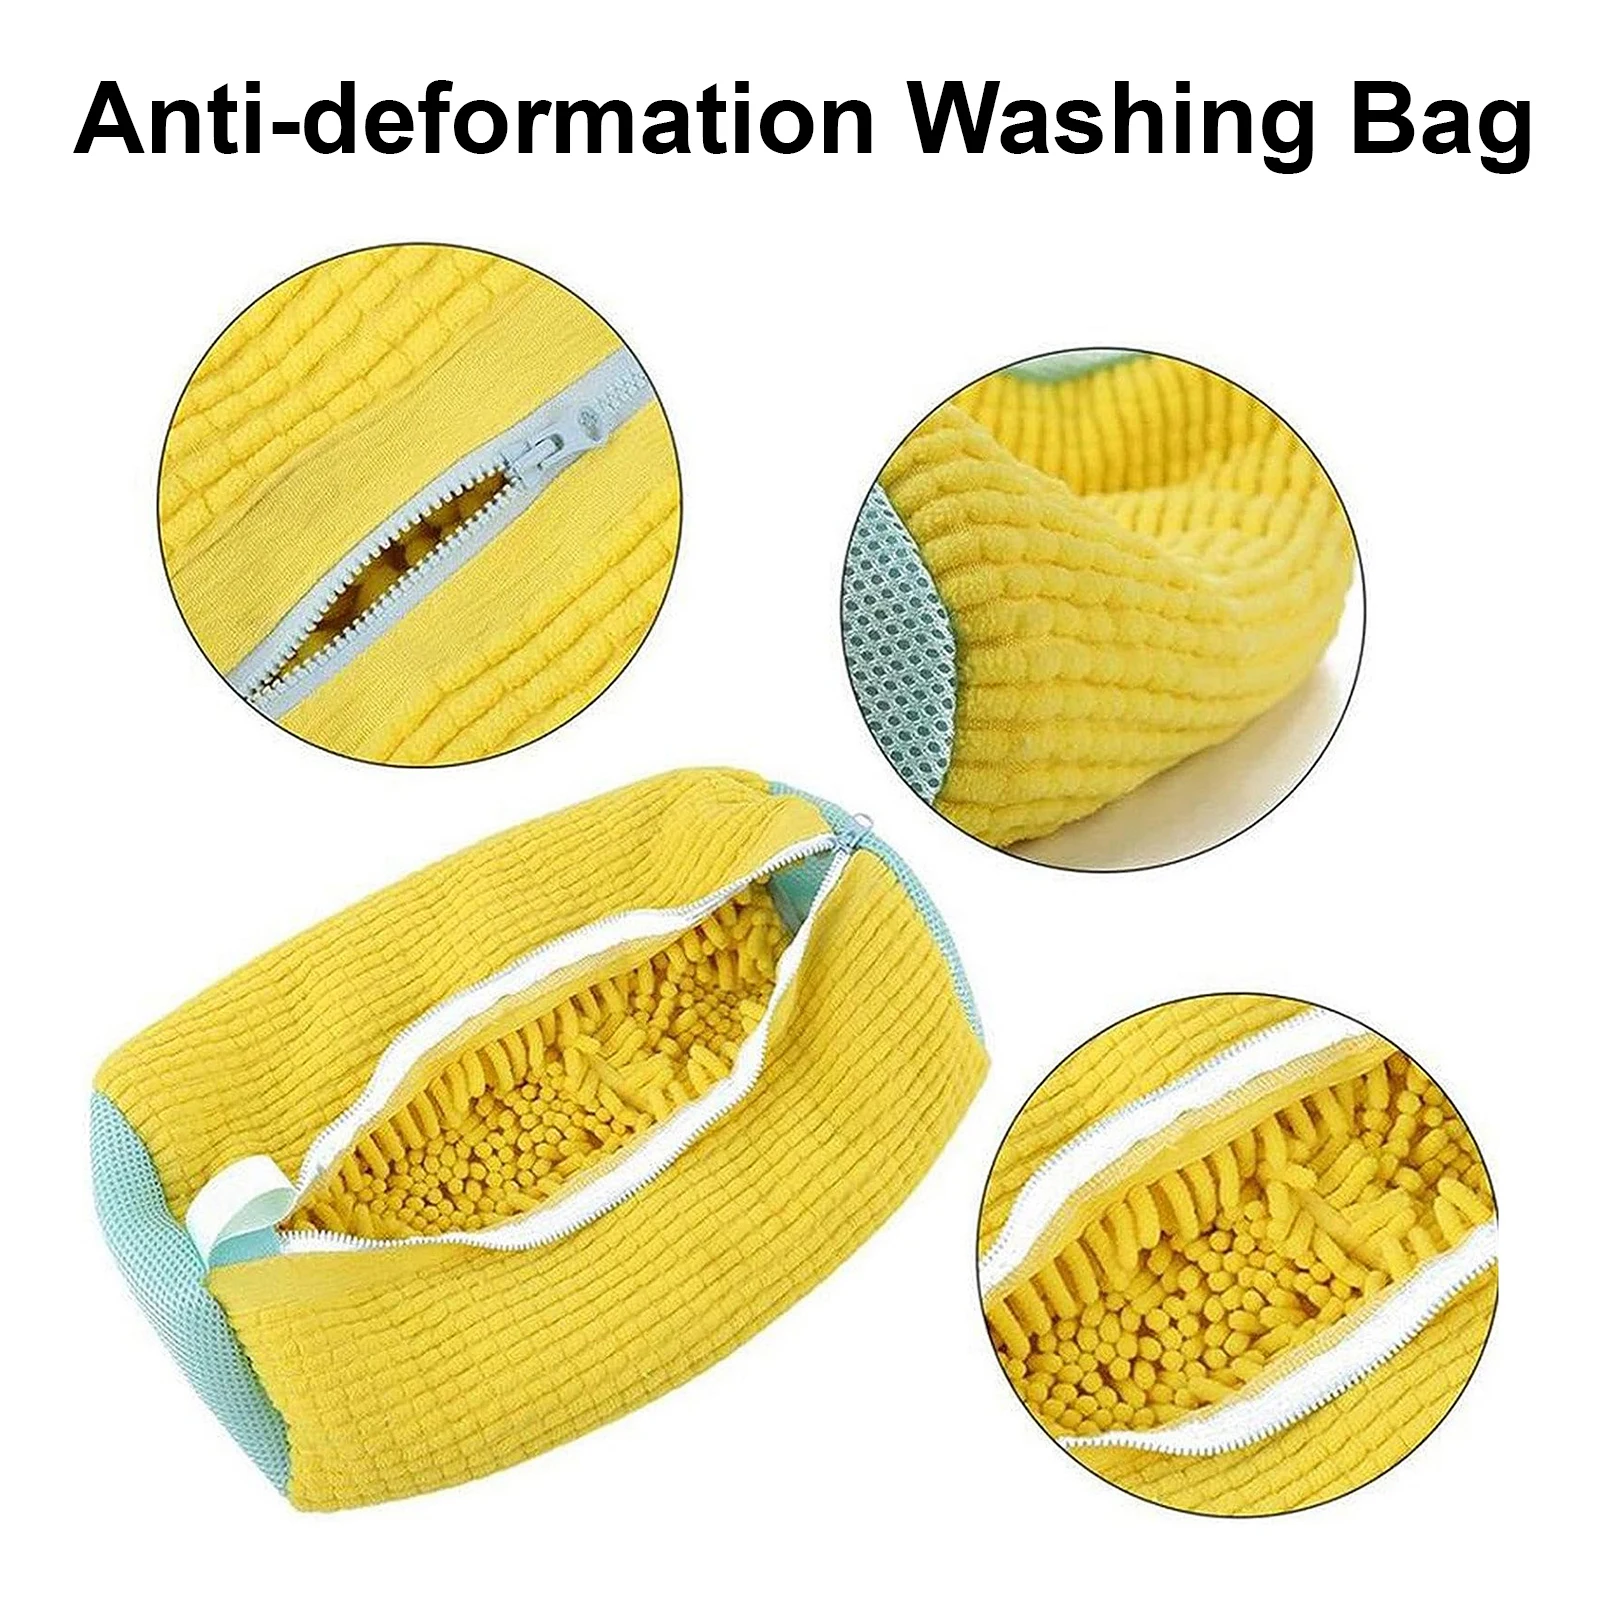 Washing Shoes Bag Cotton Laundry Net Fluffy fibers Easily remove dirt Washing Bags Anti-deformation Shoes Clothes Organizer